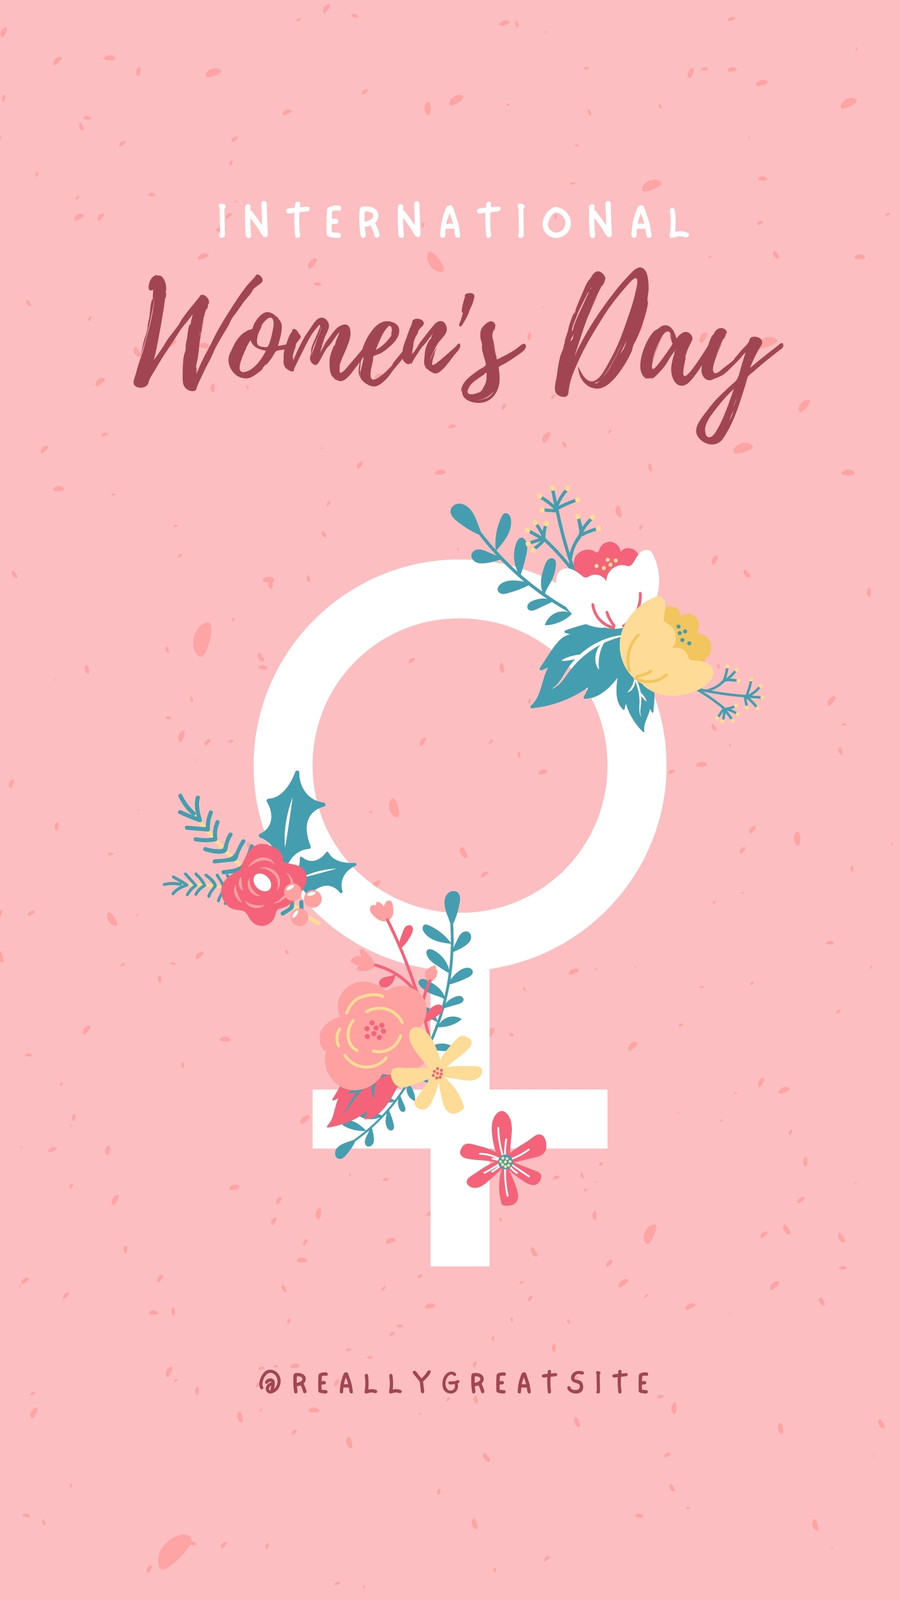 Free and customizable international womens day templates